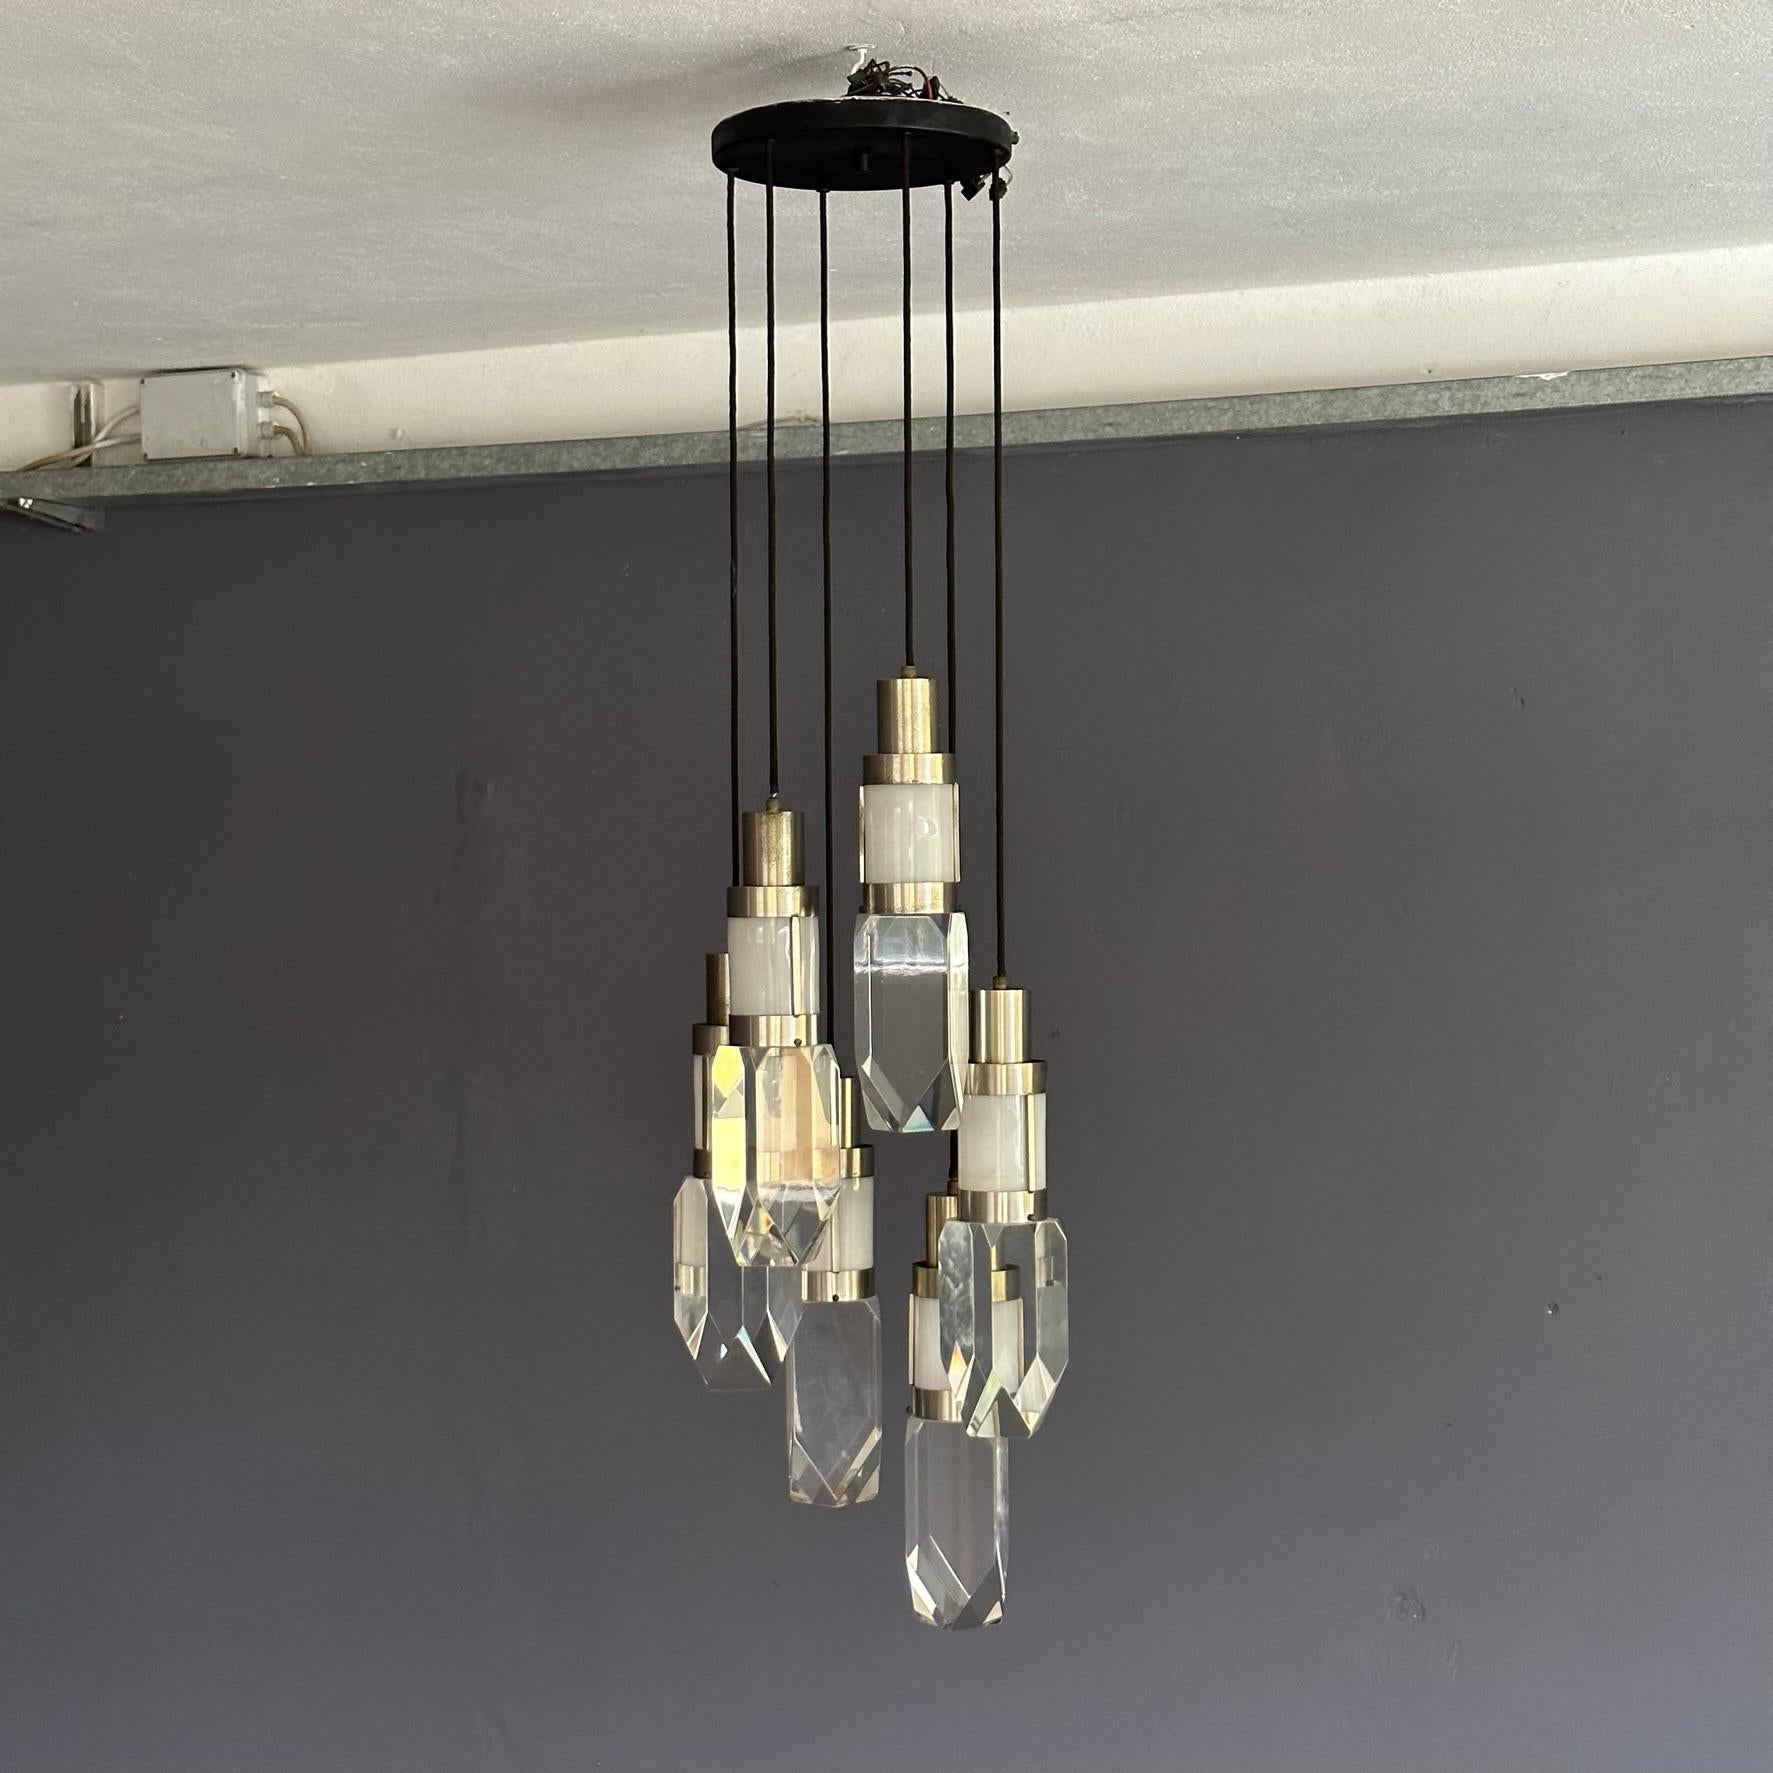 1970s pendant chandelier, design by Gaetano Missaglia
Chandelier with chromed metal and acrylic glass elements produced by Gaetano Missaglia in the seventies.
The color of the diffusers is removable, thanks to these colored discs it is possible to